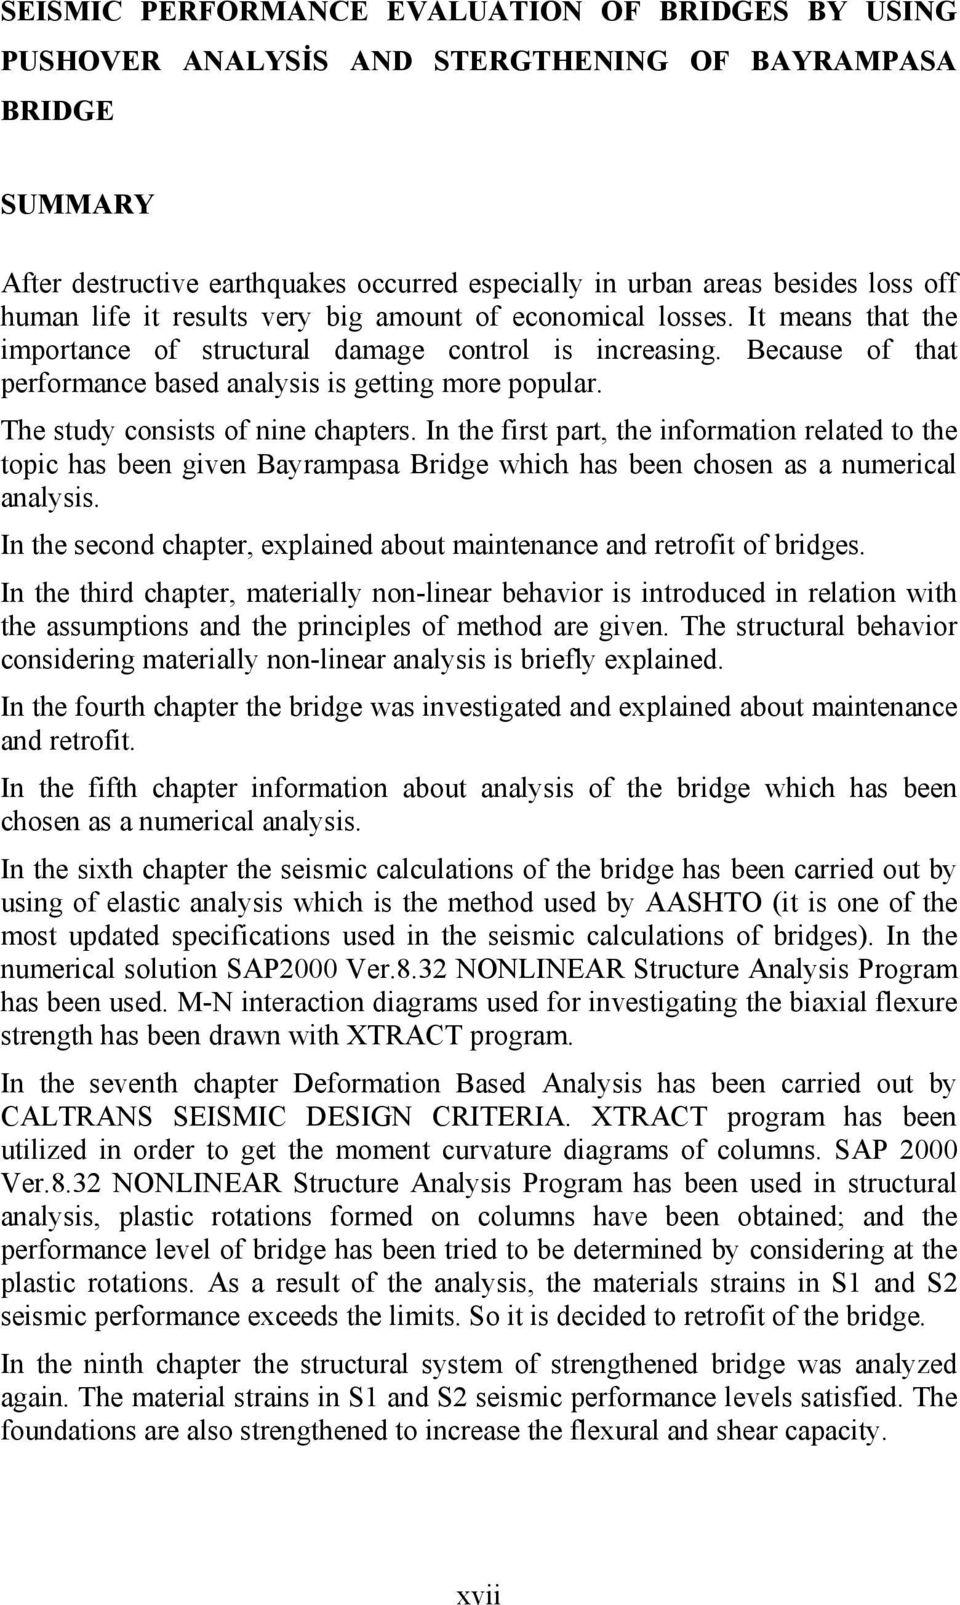 The study consists of nine chapters. In the first part, the information related to the topic has been given Bayrampasa Bridge which has been chosen as a numerical analysis.